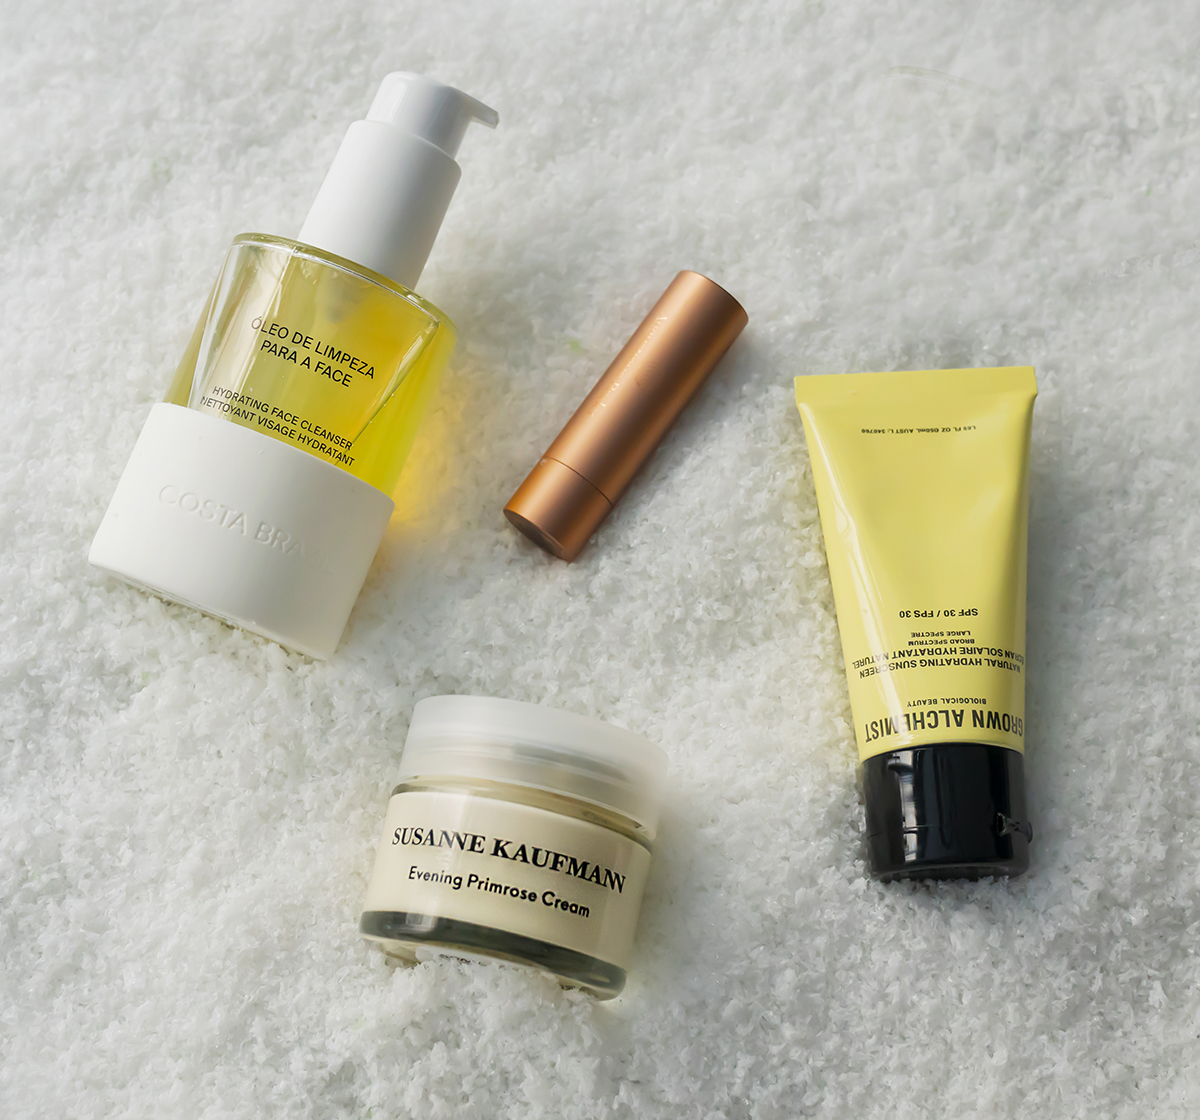 The perfect kit for your winter holidays